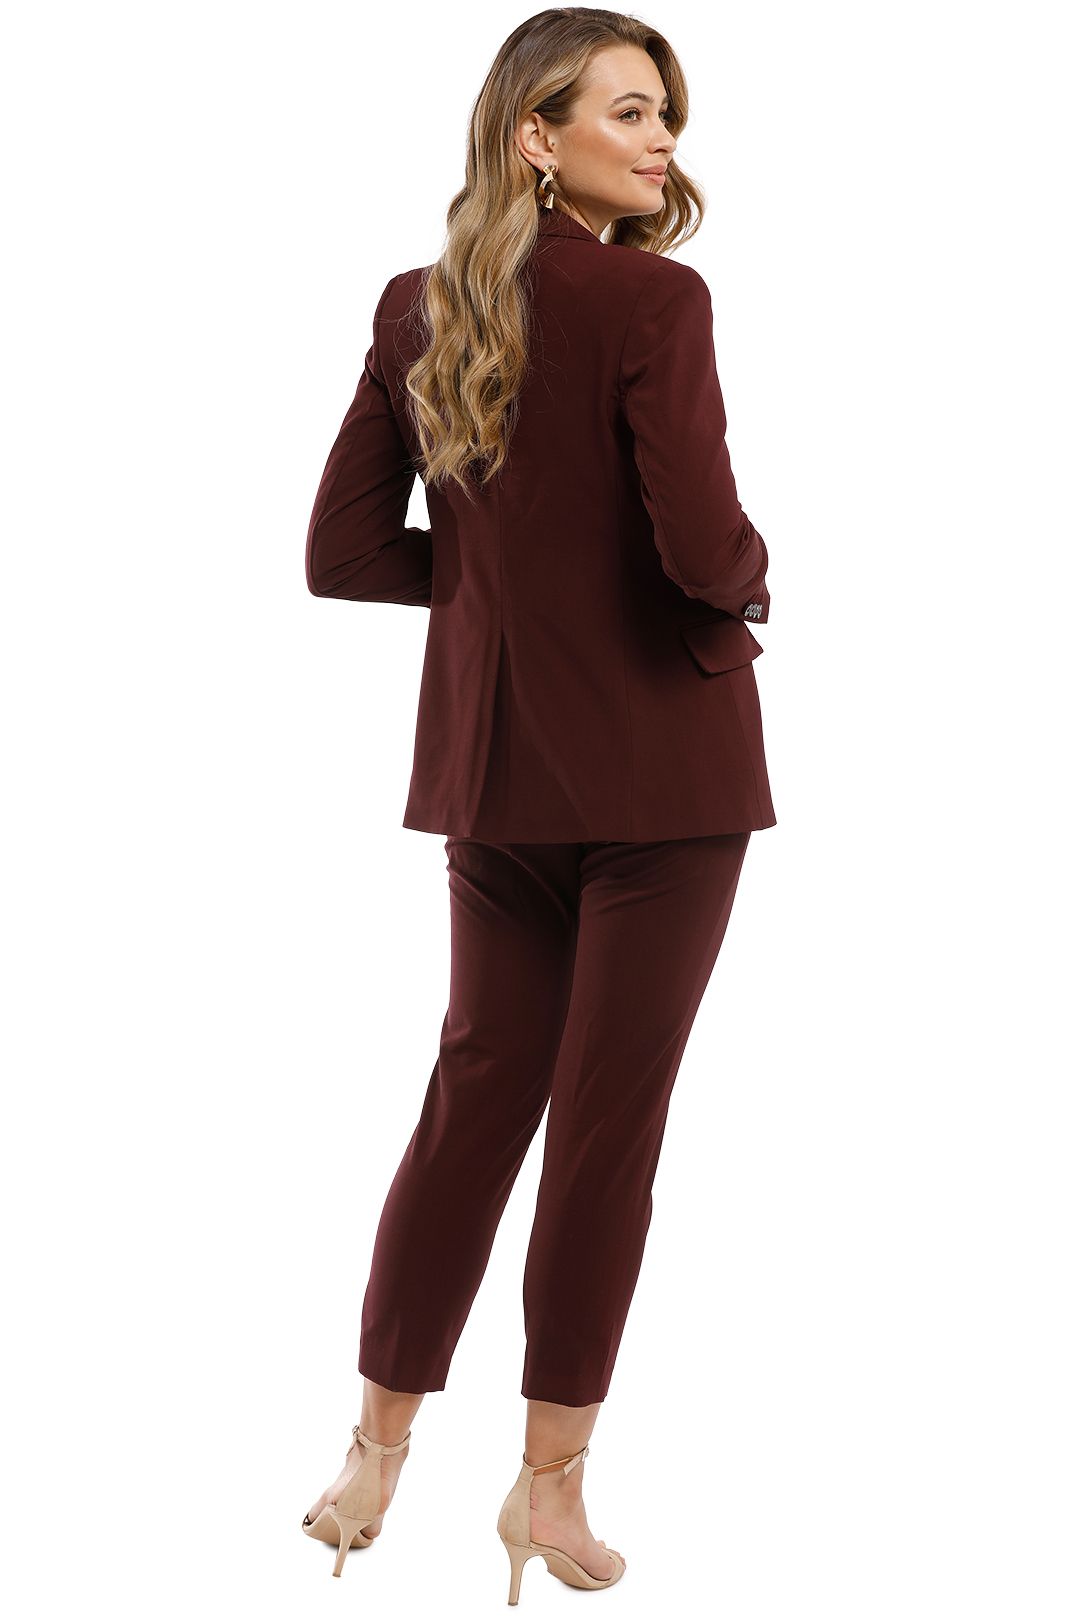 Theory - Essentials Jacket and Pant Set - Burgundy - Back